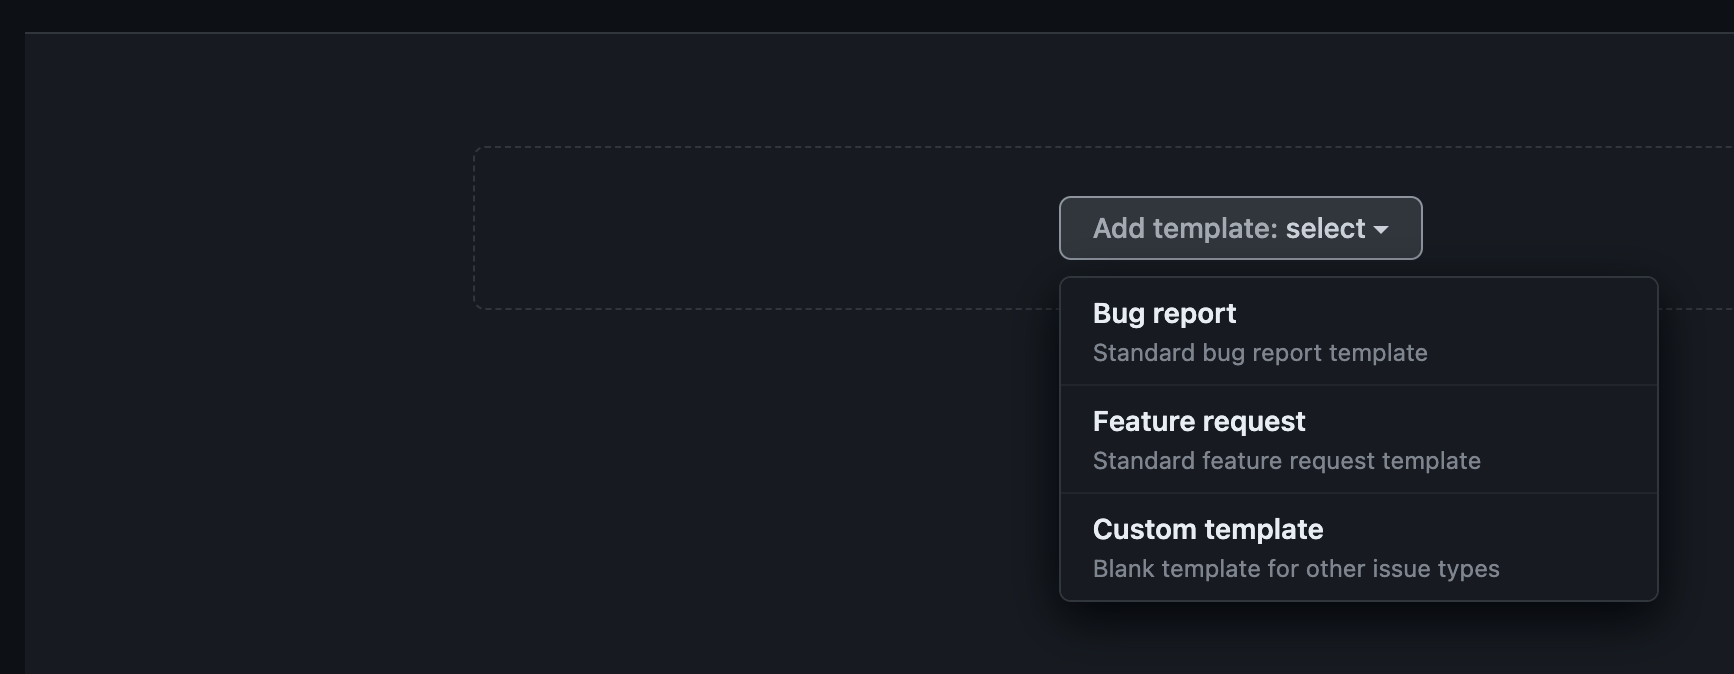 Github Issue Add template